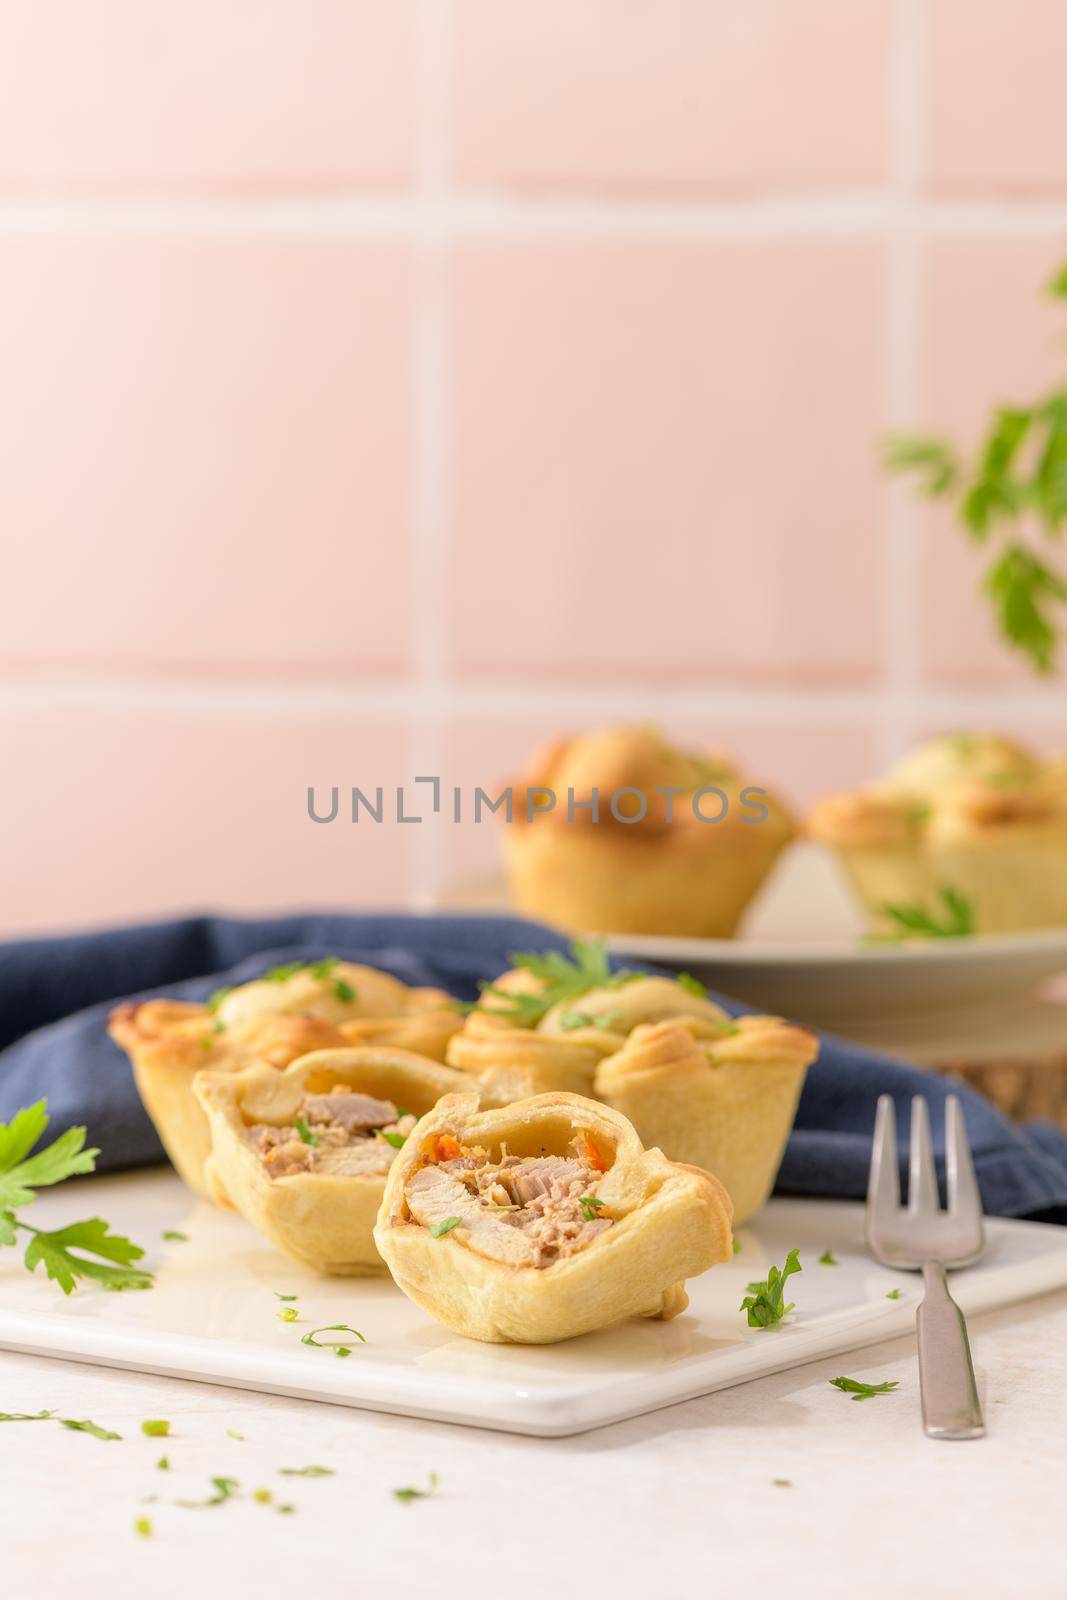 Chicken pies and parsley leaves on white ceramic dishes in a kitchen counter top.